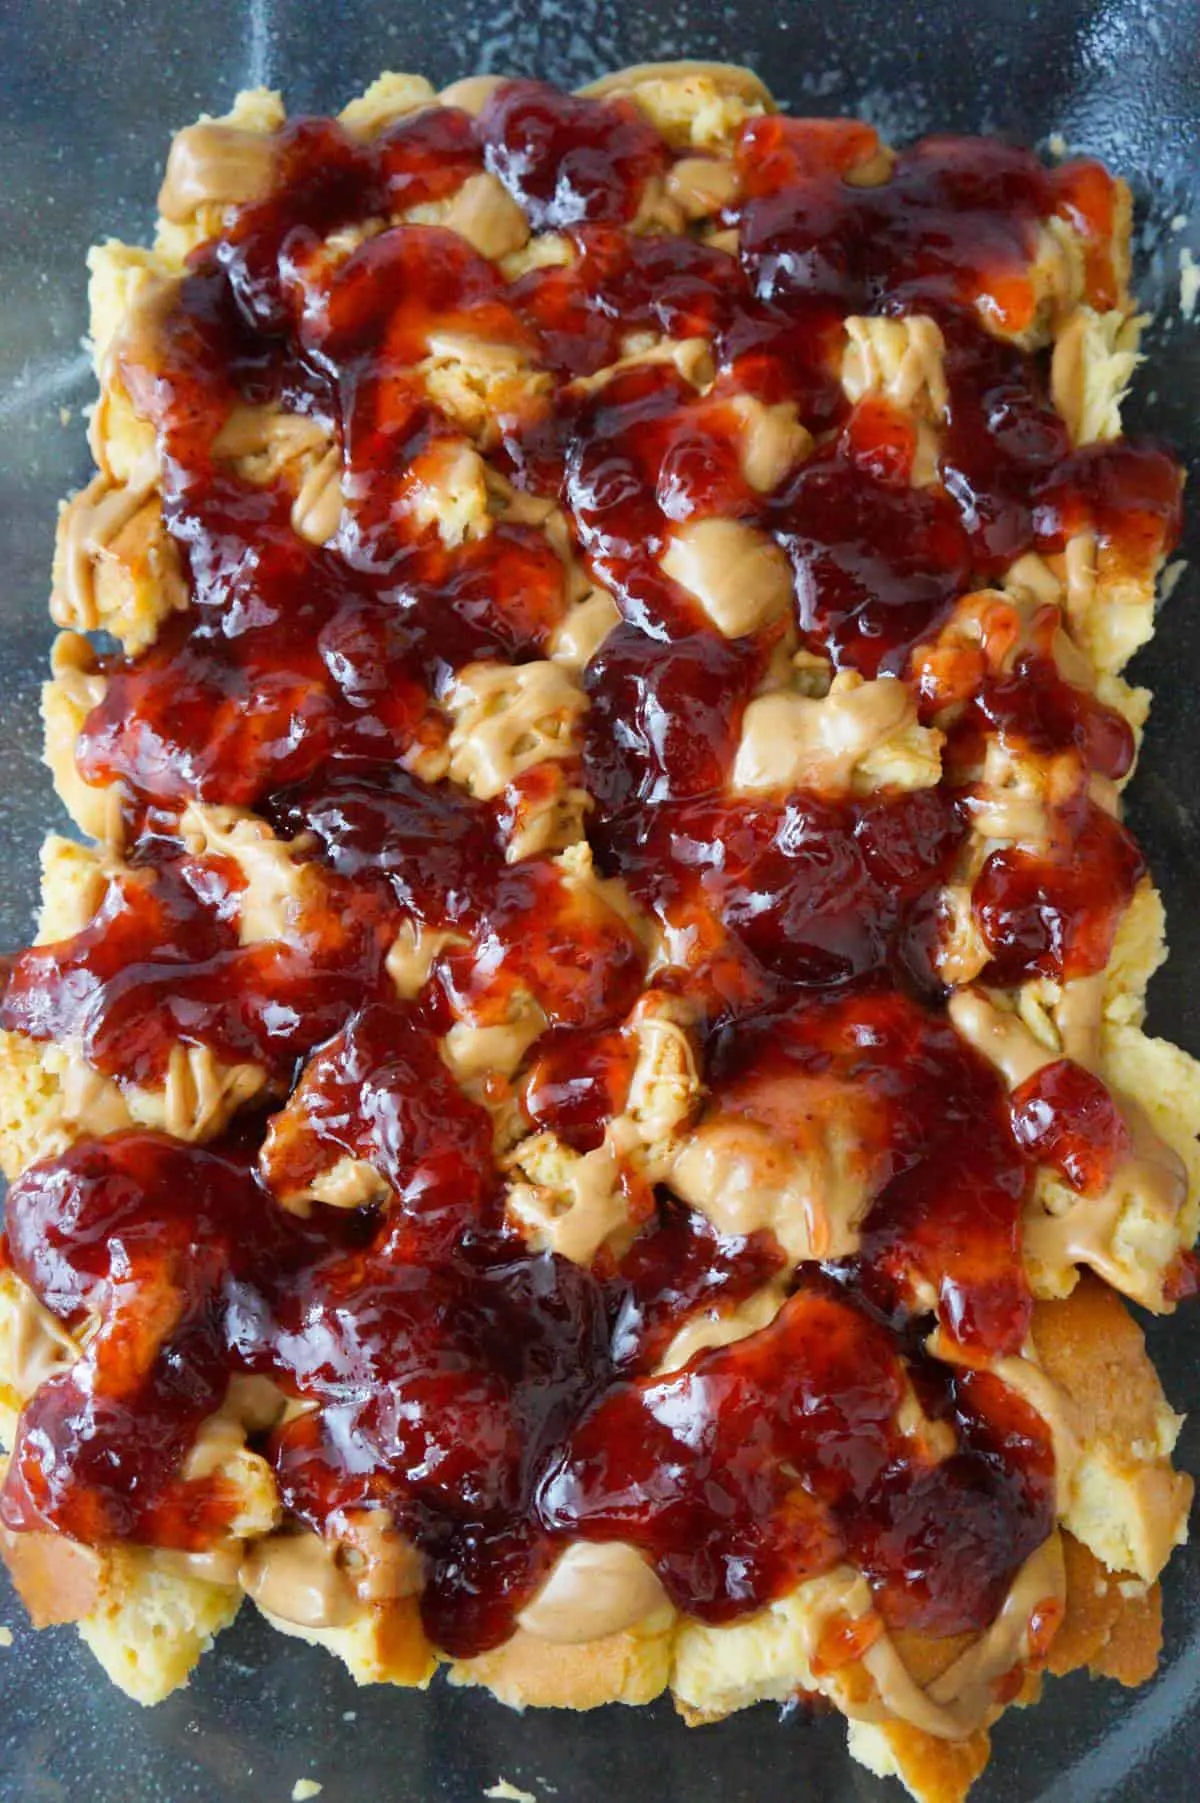 strawberry jam and peanut butter on top of cubed bread in a baking dish